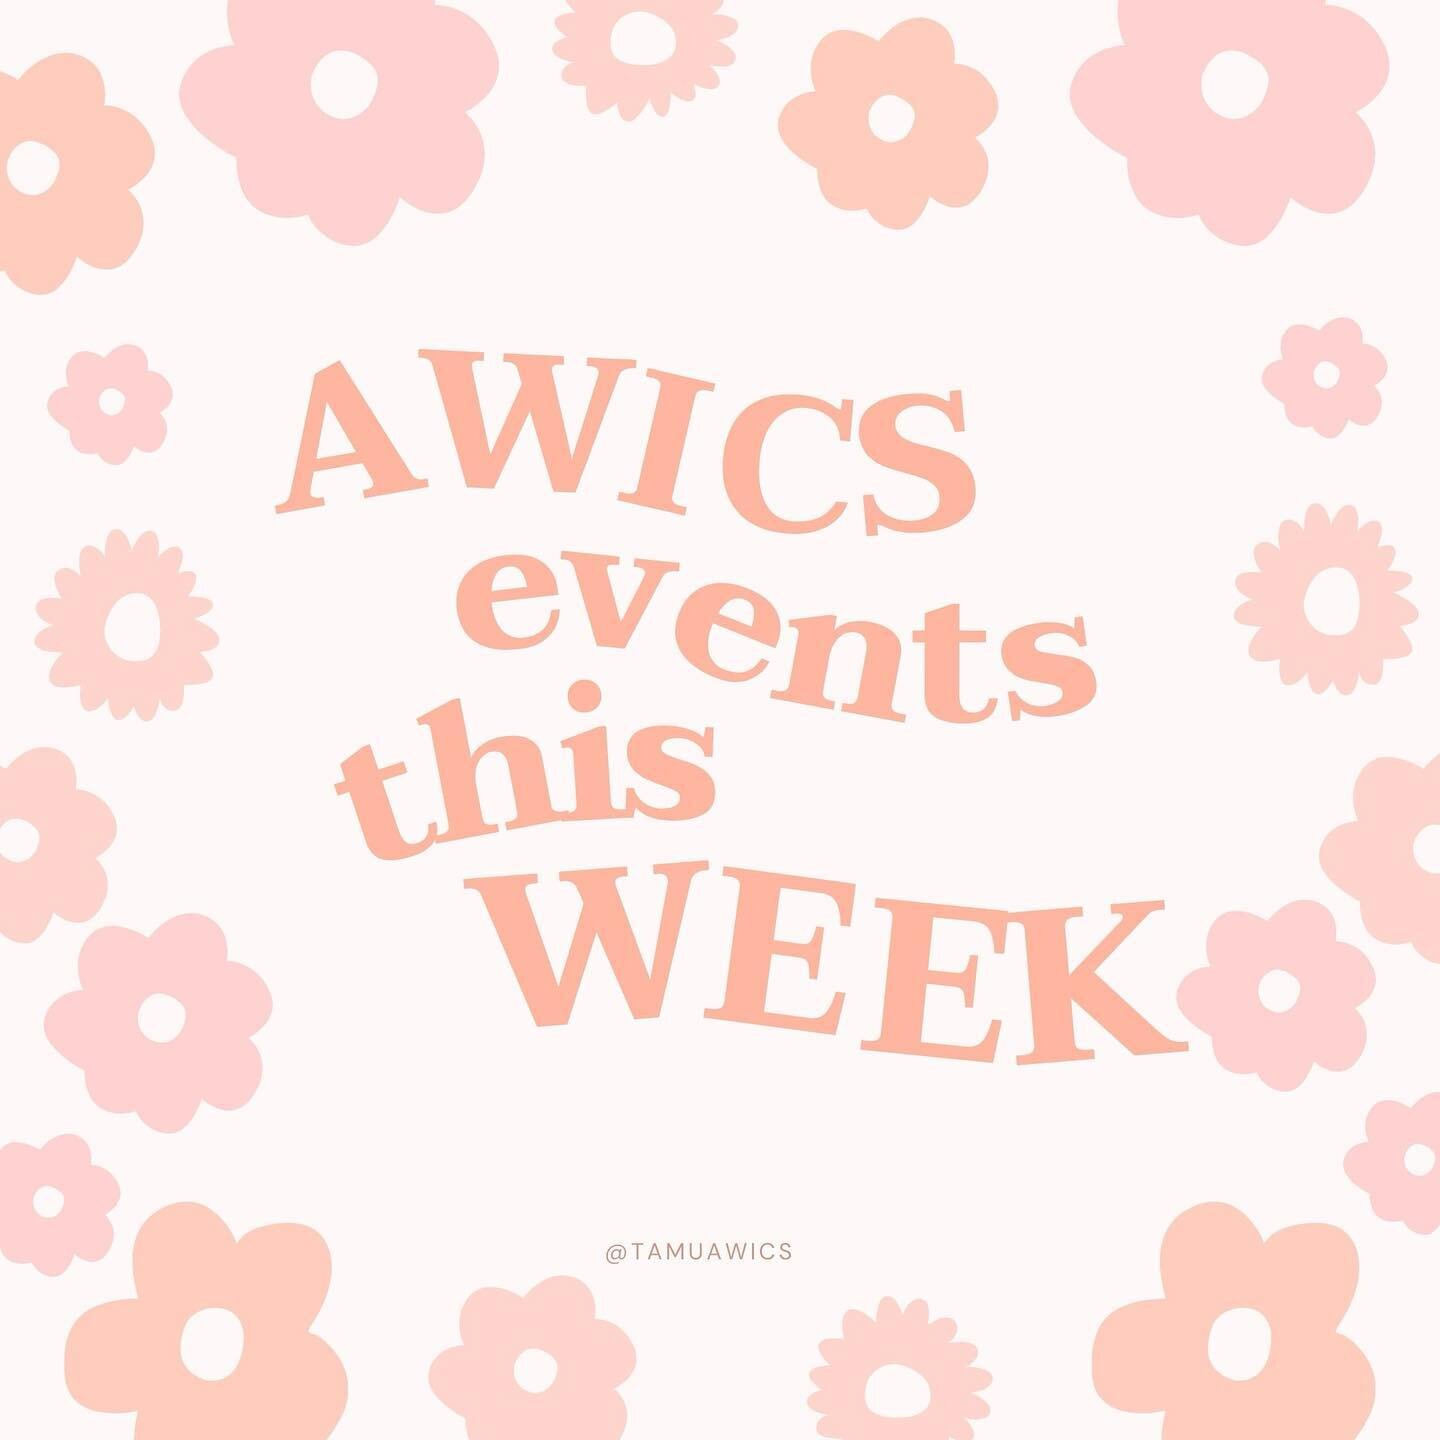 Here are all the events AWICS will be hosting this week! More information on each event is on the graphics above.

!!Reminder!! CSCE Department Merch is open and it will be closing April 7th(THIS SUNDAY!!) 👚 Go get your merch through the link in the